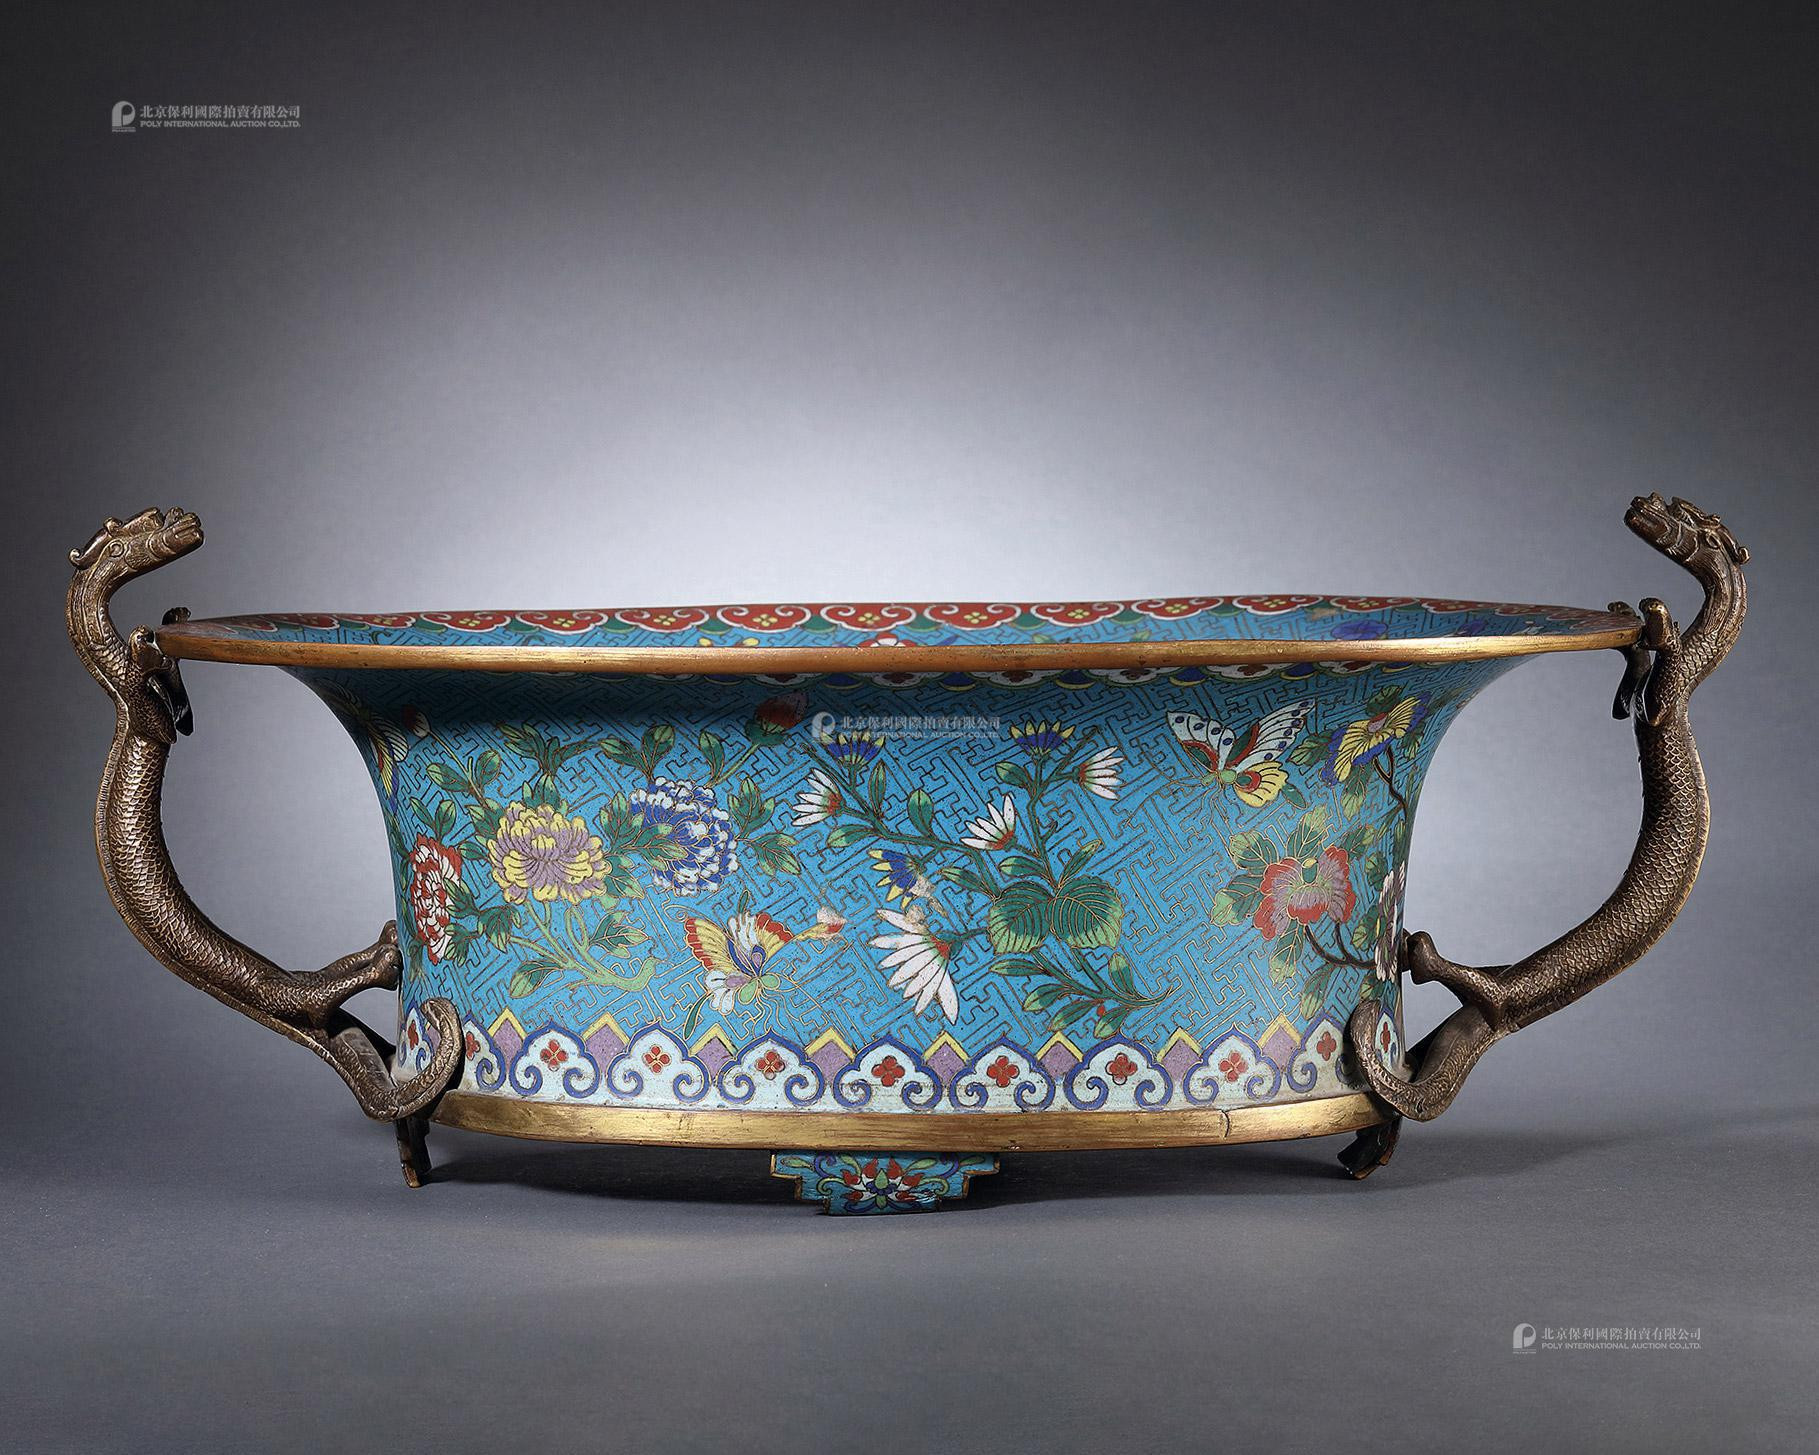 A LARGE CLOISONNÉ ENAMEL ‘FLOWER AND BUTTERFLY’ WASHER WITH DOUBLE DRAGON HANDLE